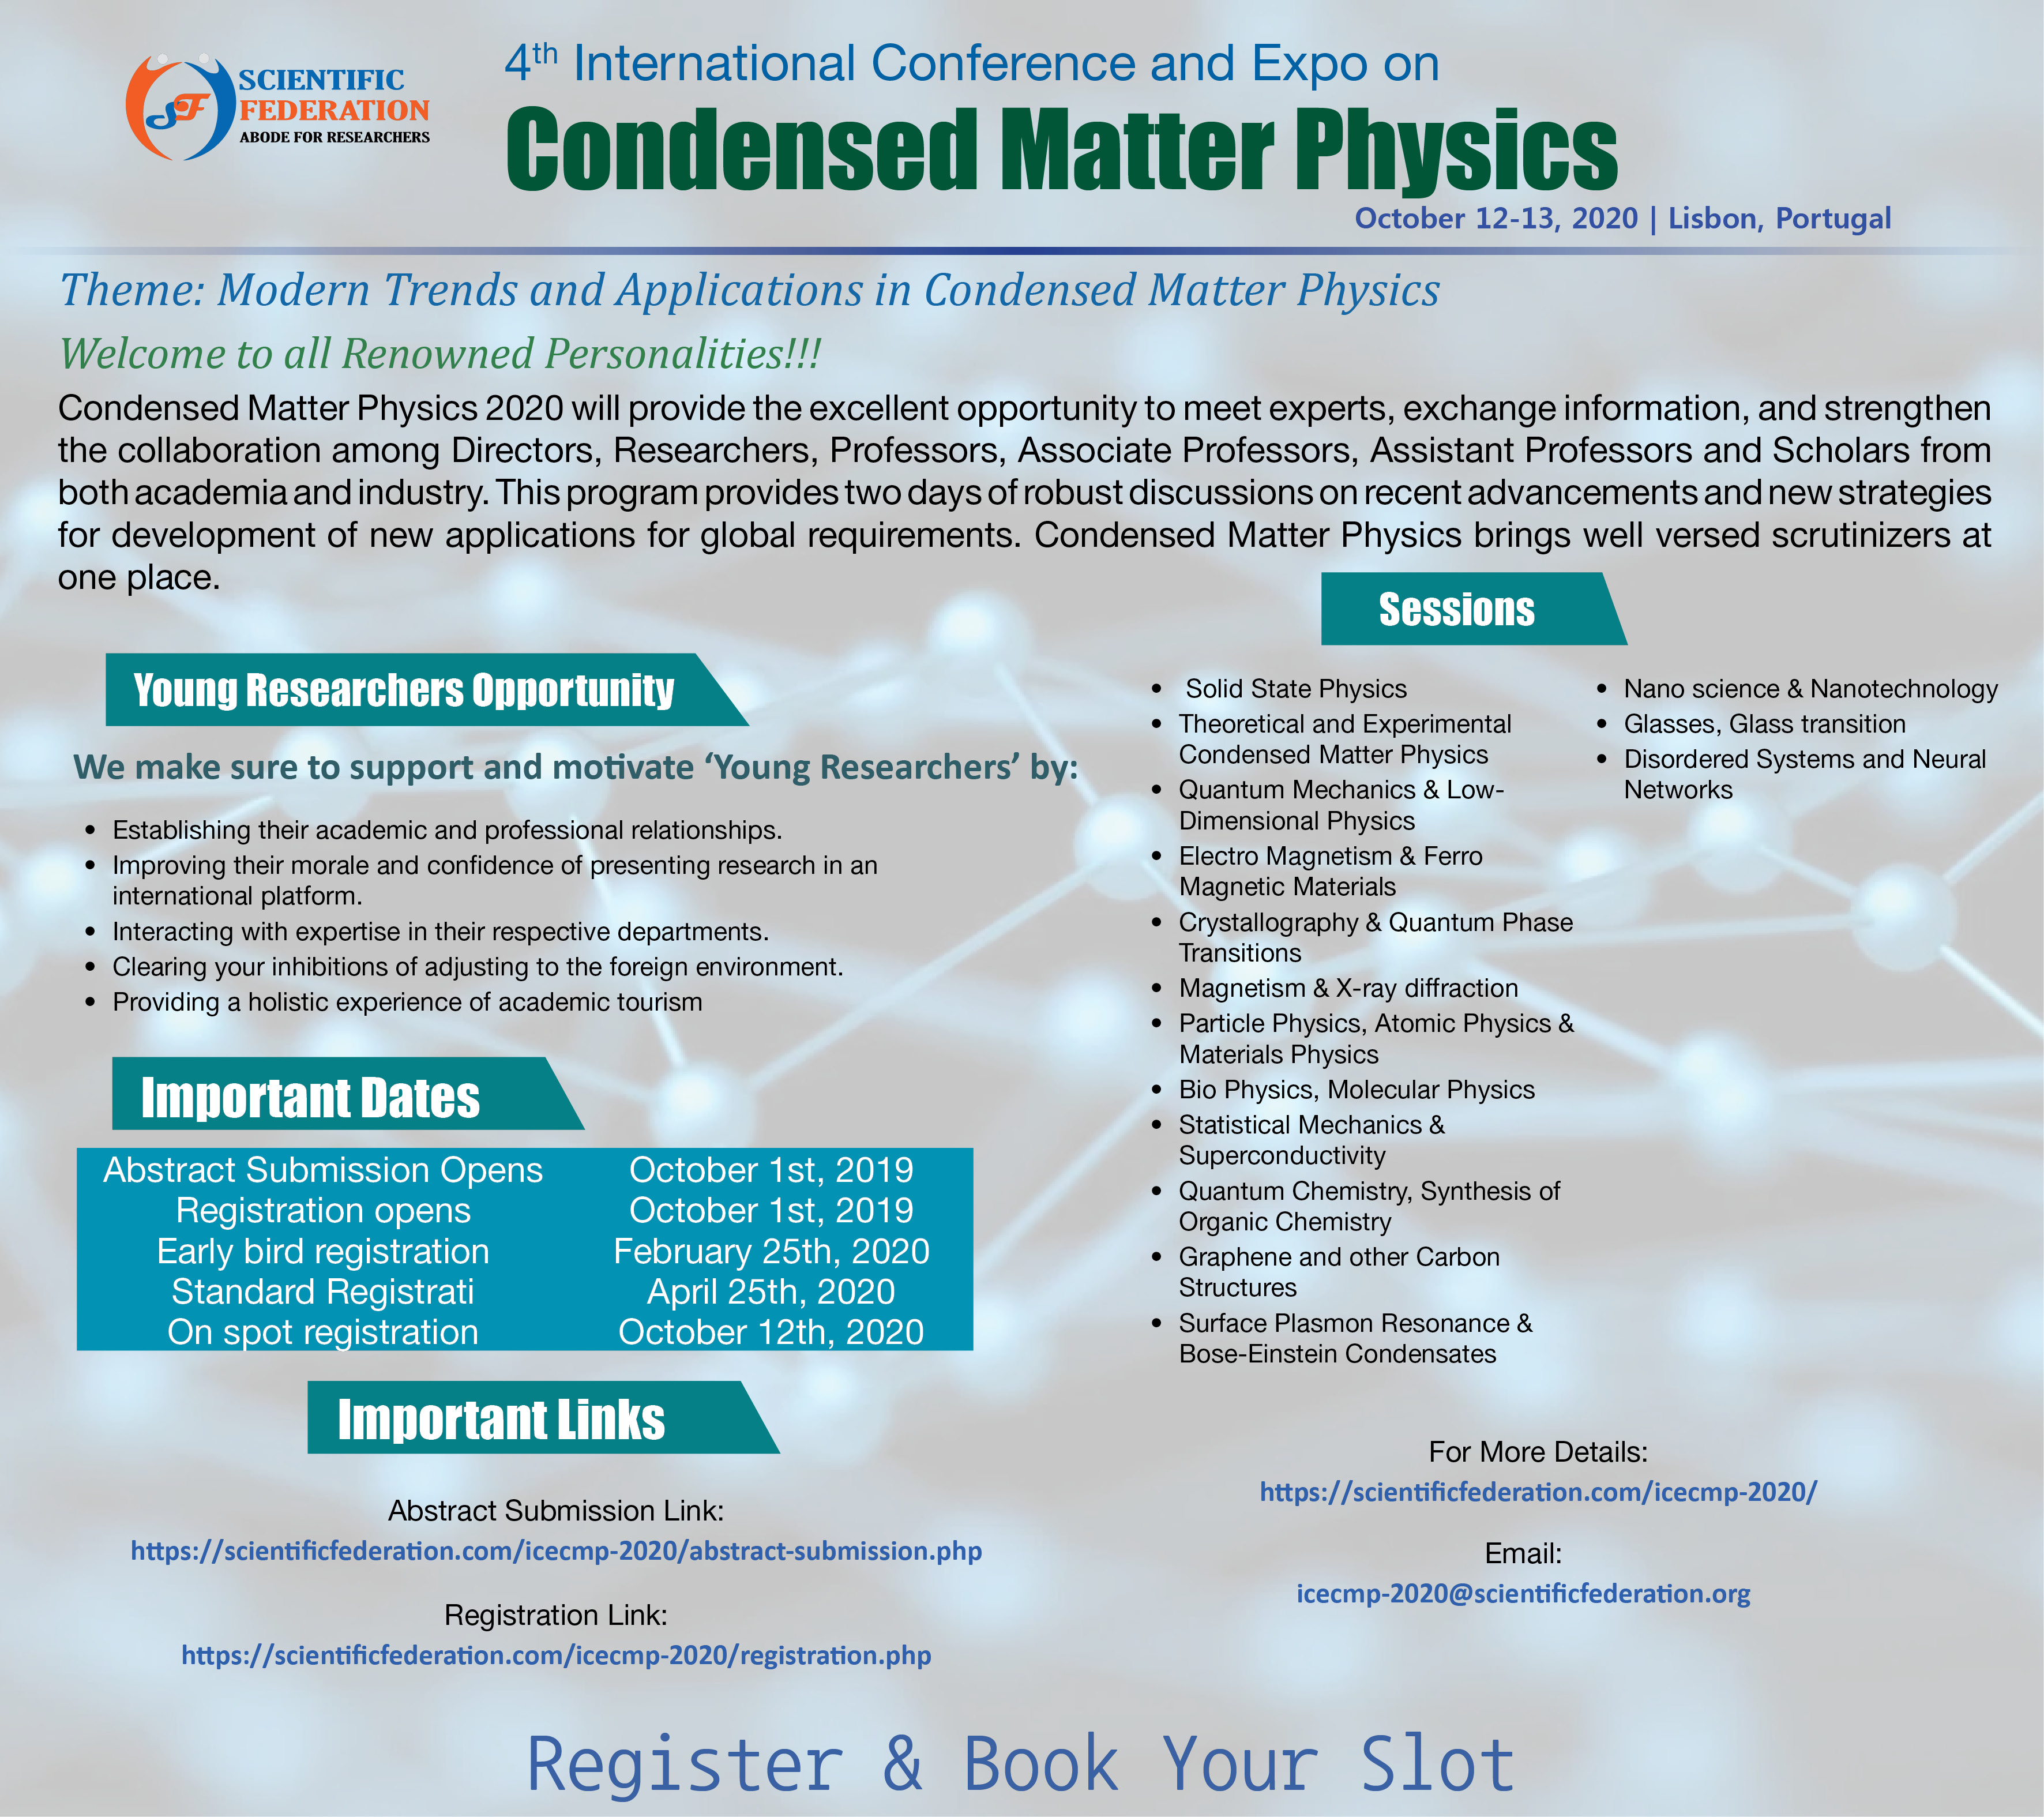 4th International Conference and Expo on Condensed Matter Physics, Lisbon, Lisboa, Portugal